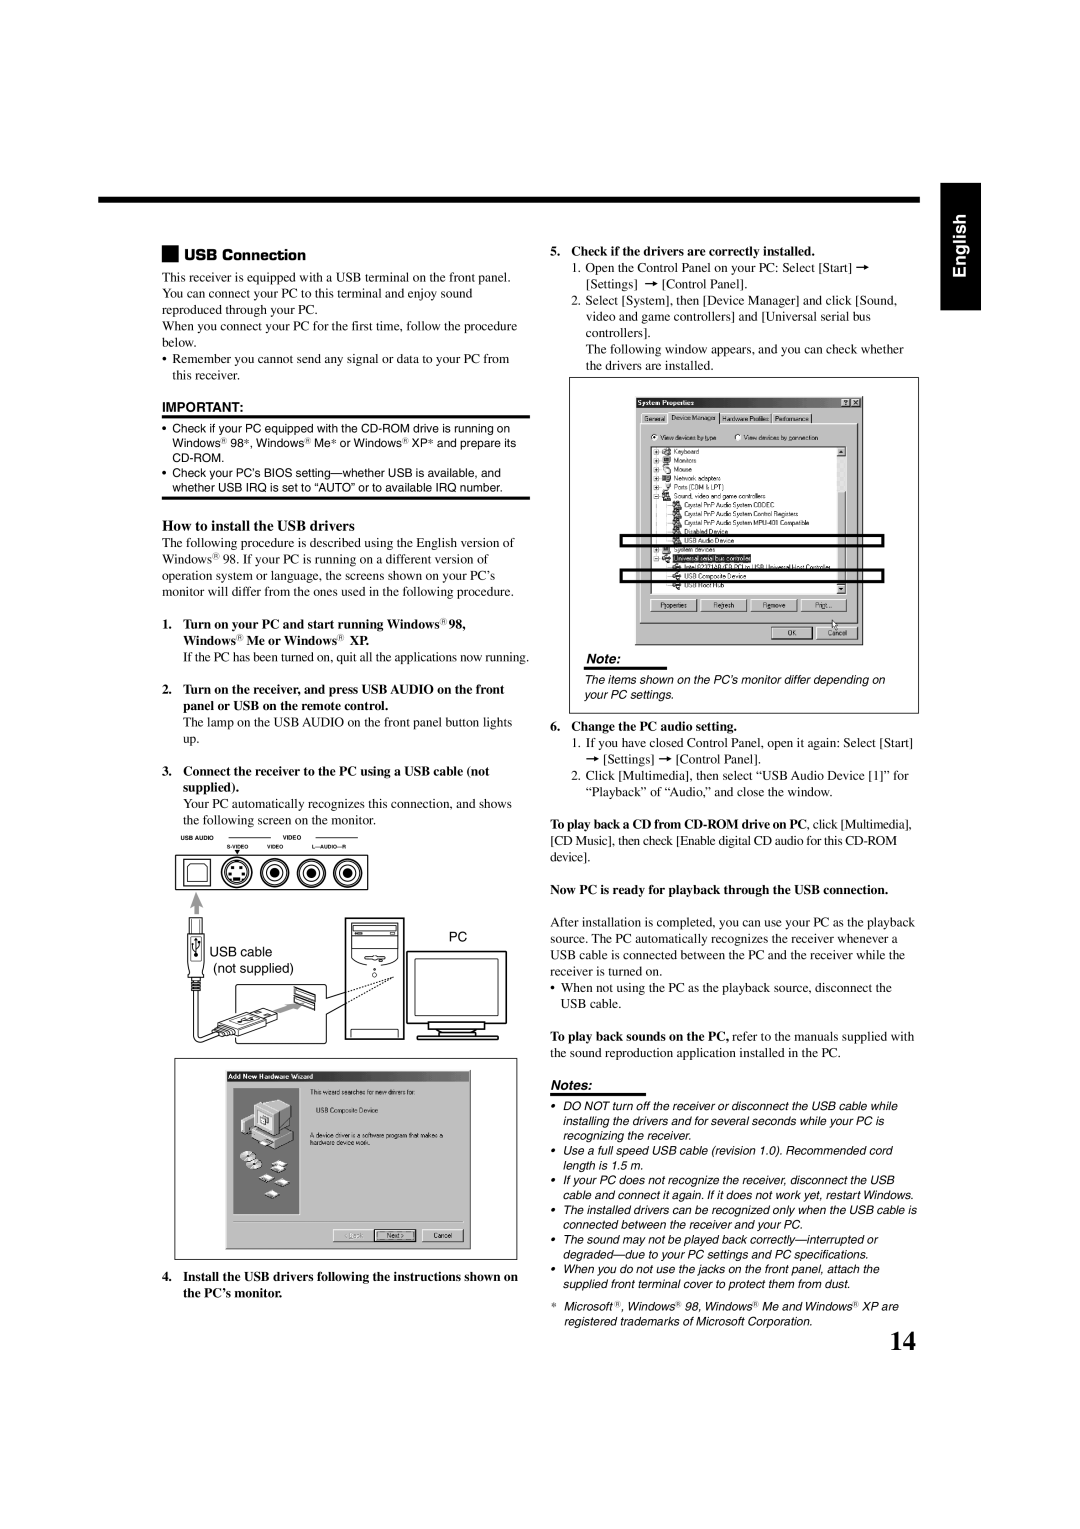 JVC RX-8020VBK manual English, Connect the receiver to the PC using a USB cable not supplied, Change the PC audio setting 